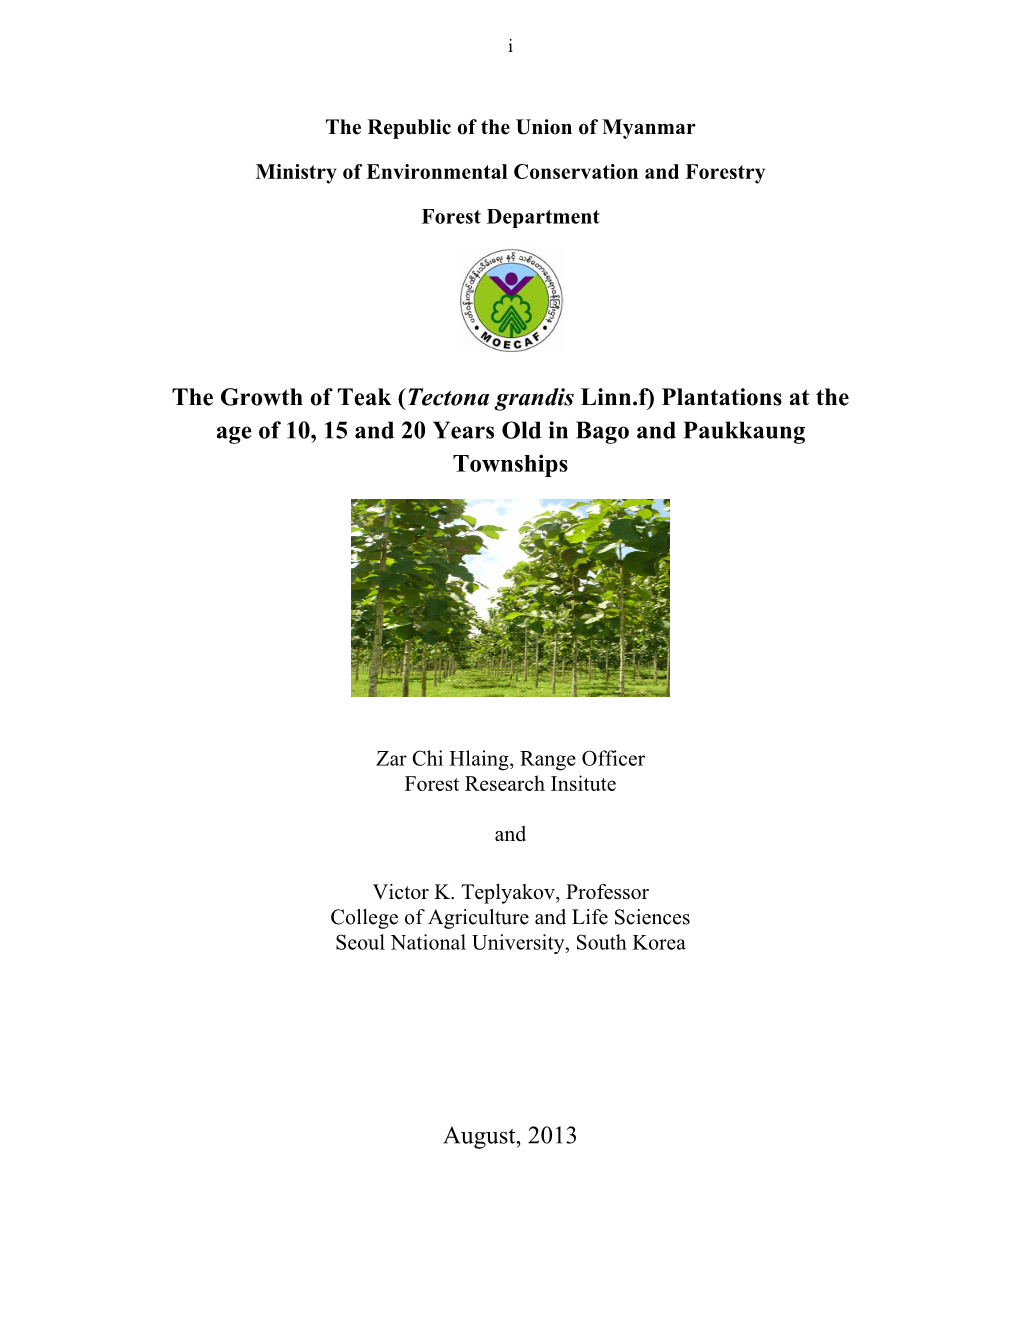 The Growth of Teak (Tectona Grandis Linn.F) Plantations at the Age of 10, 15 and 20 Years Old in Bago and Paukkaung Townships